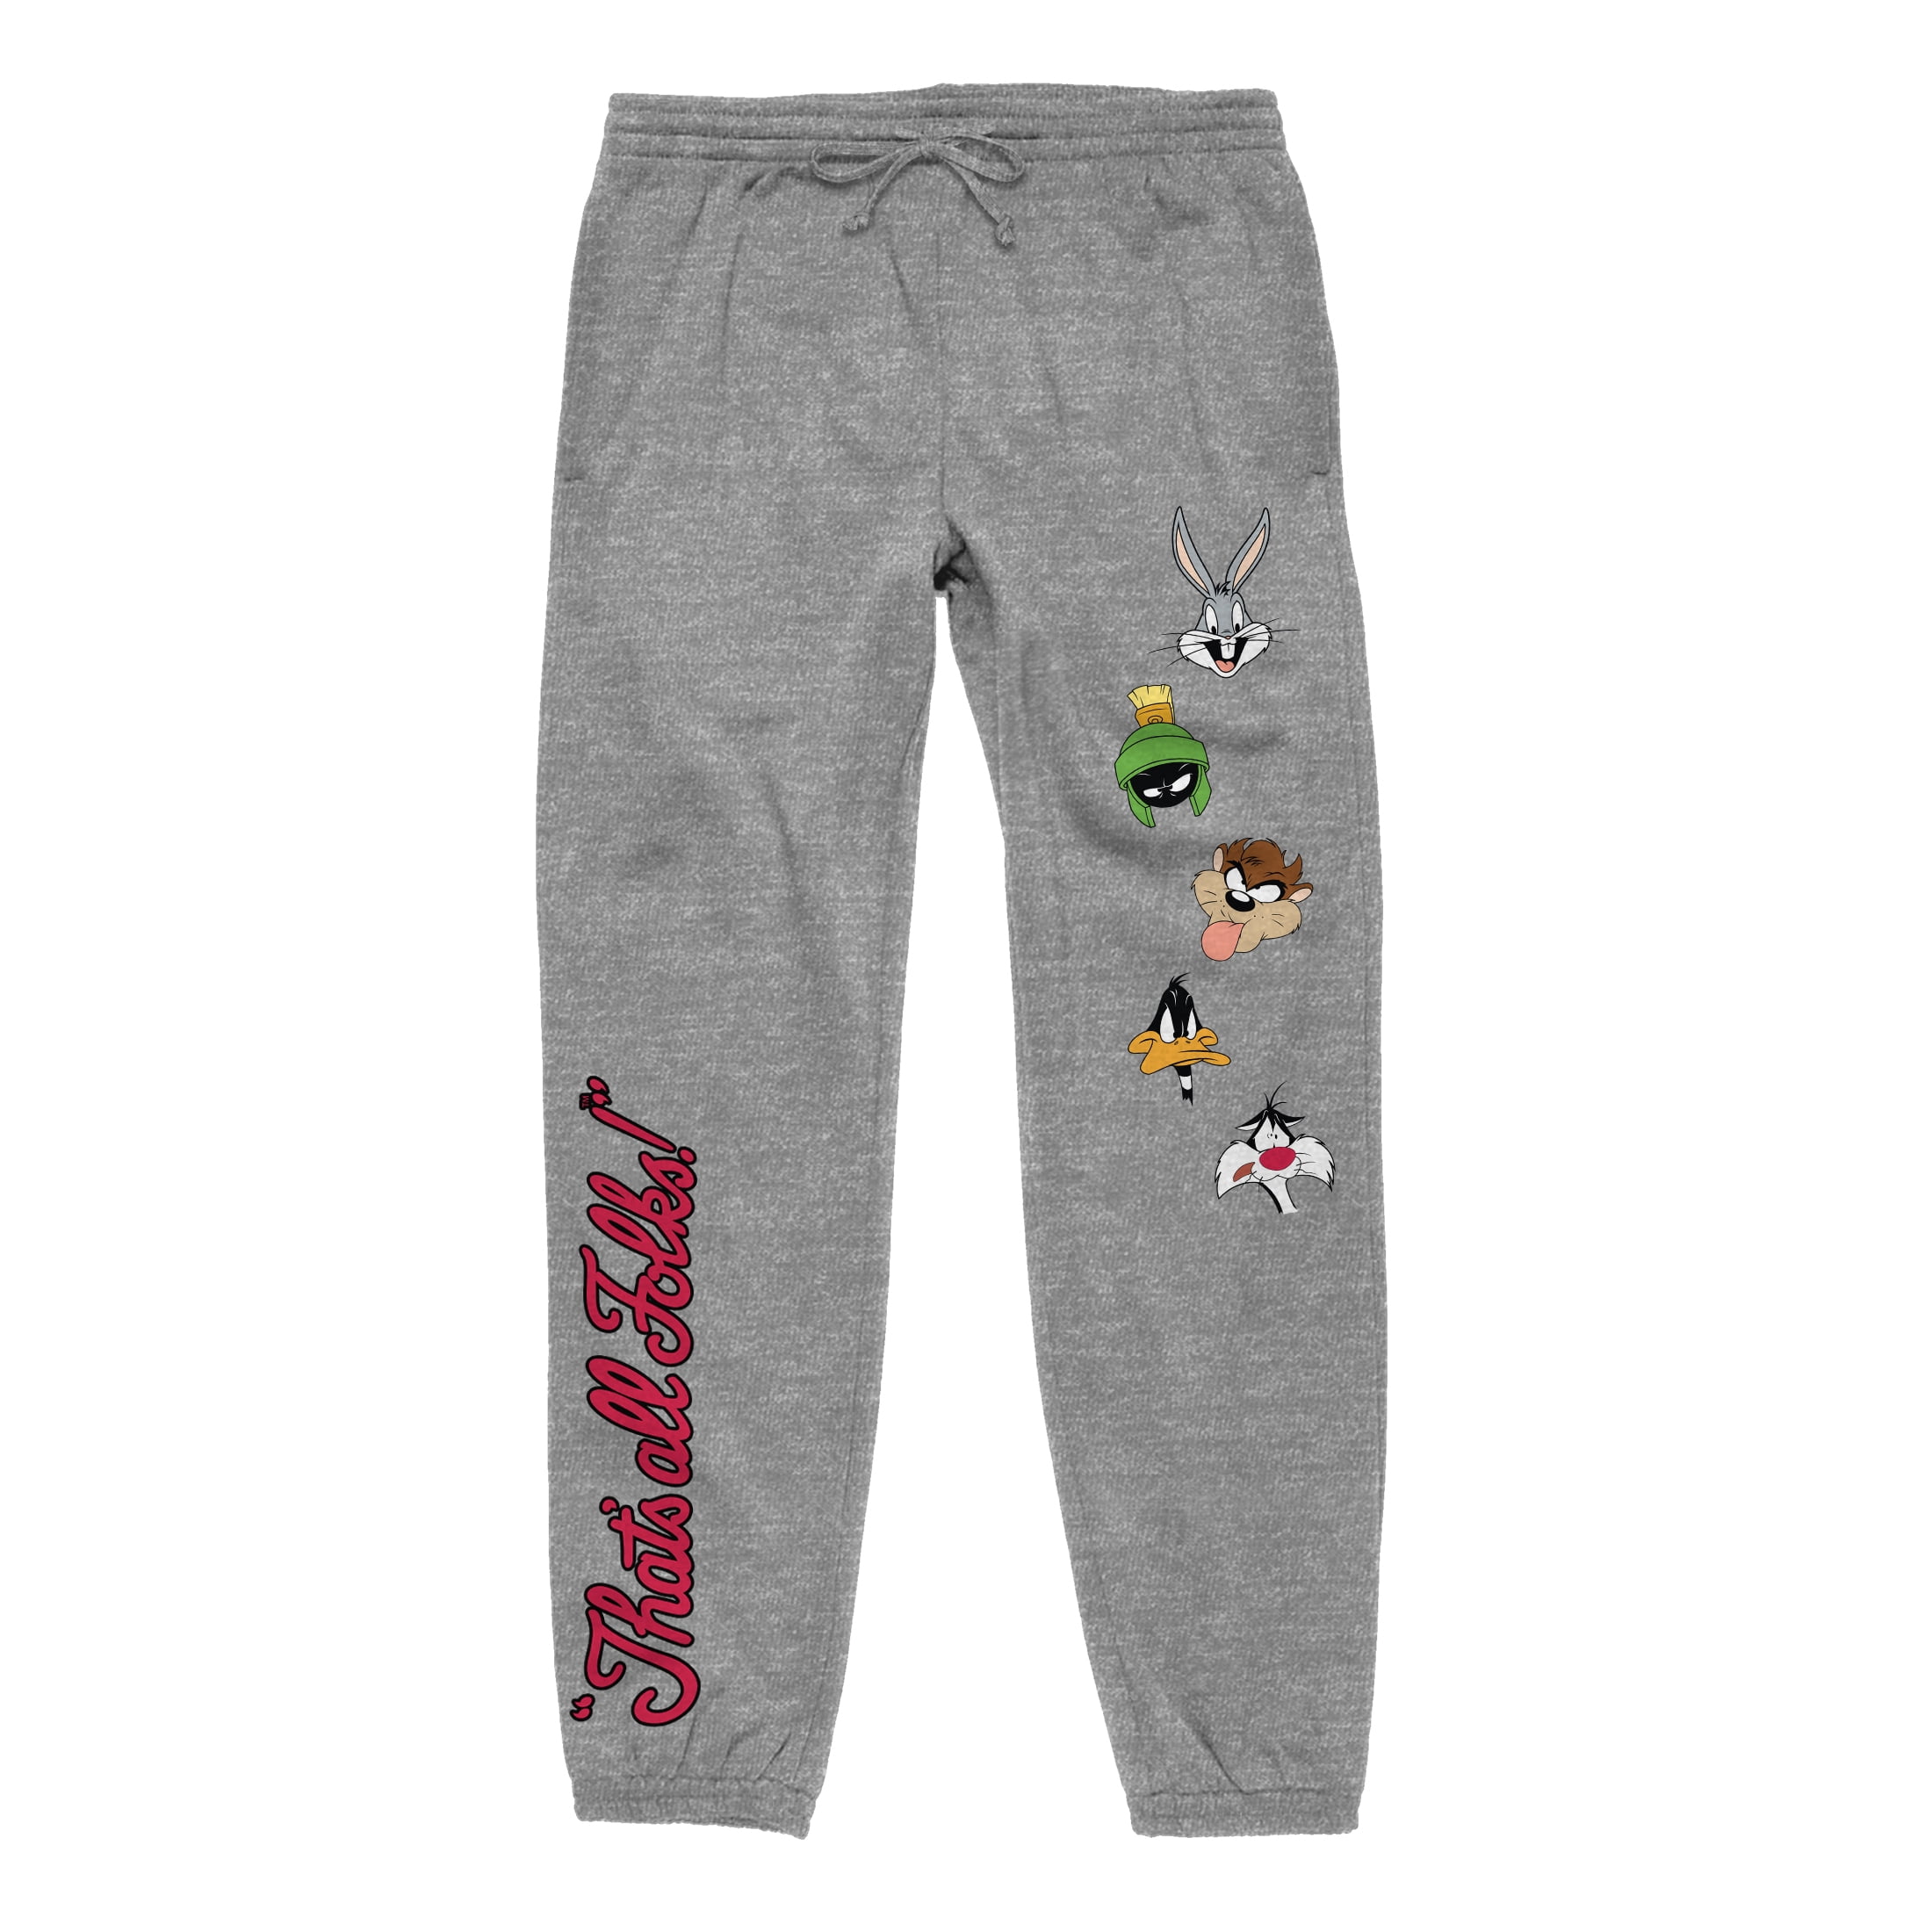 Looney Grey Adult Tunes Sweatpants- That\'s Heather All M Folks! Graphic